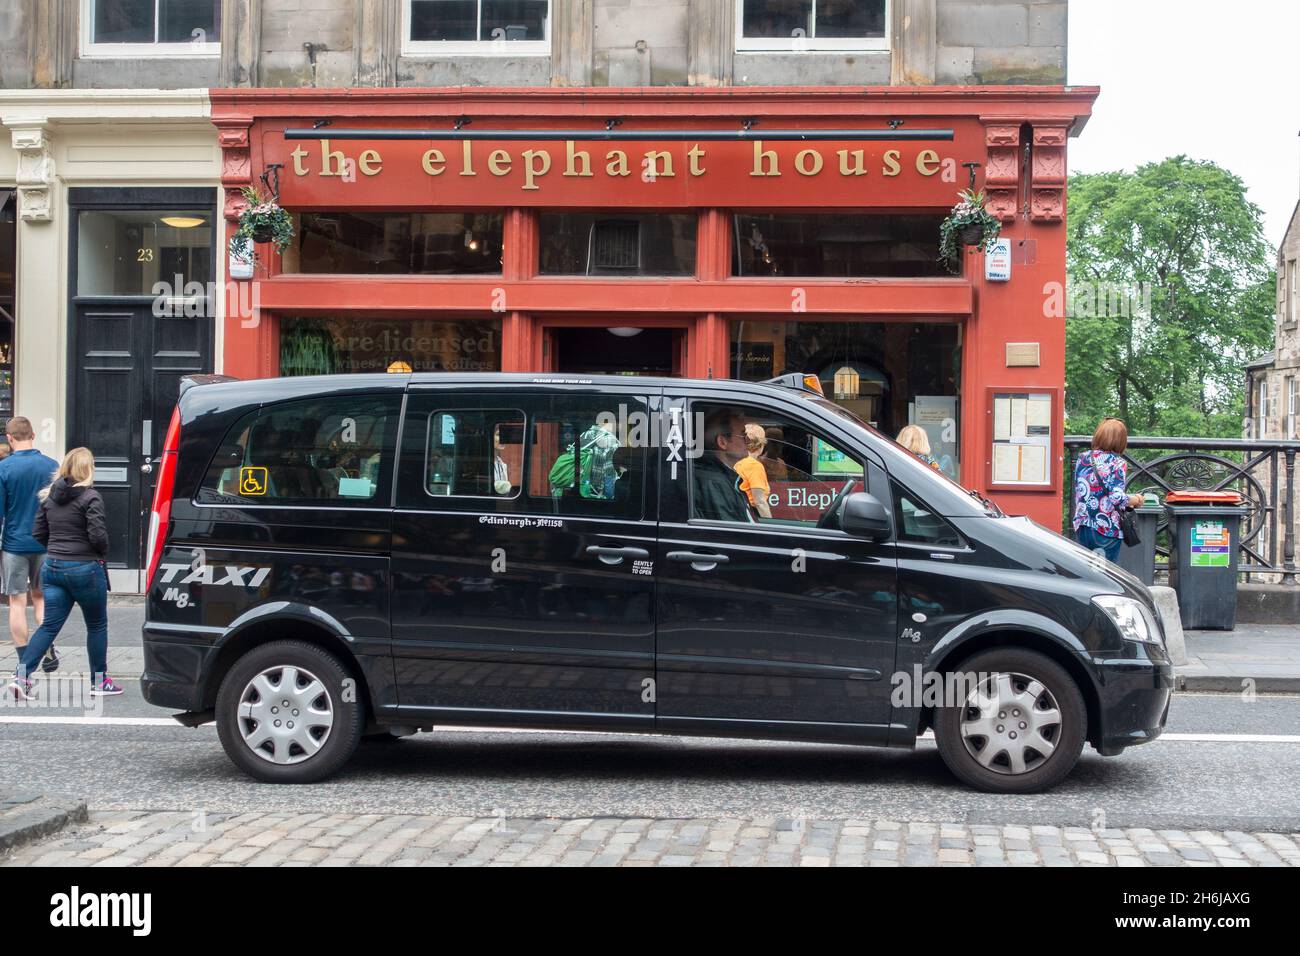 An Edinburgh Mobility Disabled Access Taxi Outside The Elephant House Cafe Made Famous By J.K. Rawlings And Other Authors Stock Photo